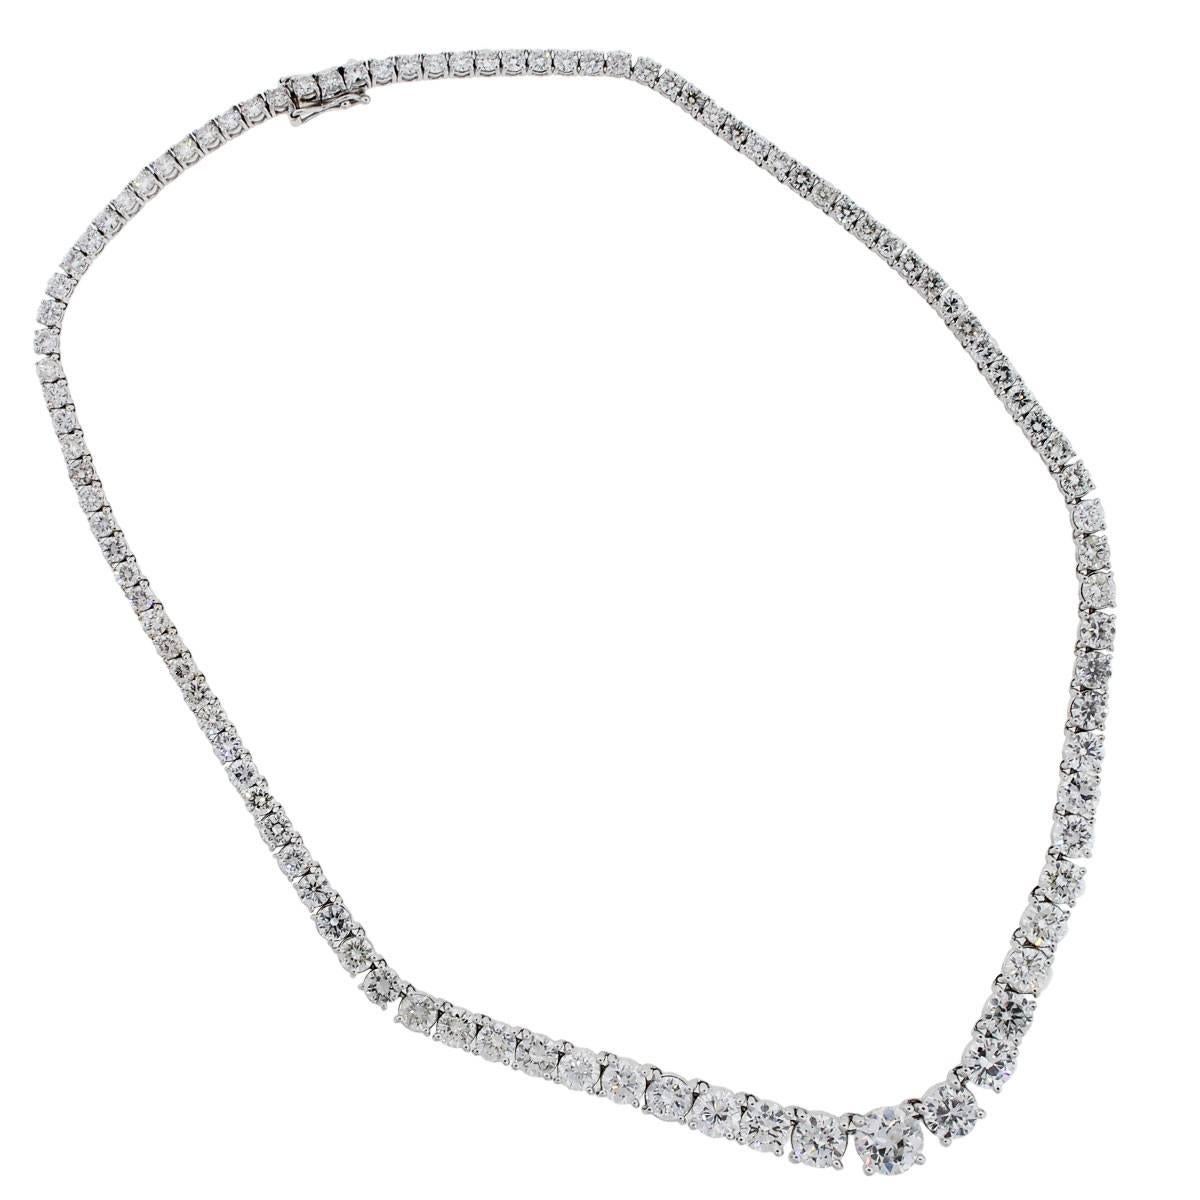 Material: 18k white gold
Diamond Details: Approximately 31.50ctw of round brilliant diamonds. Center diamond is 2.31 carat. Diamonds are F in color and SI1 in clarity
Measurements: Necklace measures 17″ in length
Clasp: Tongue in box with safety